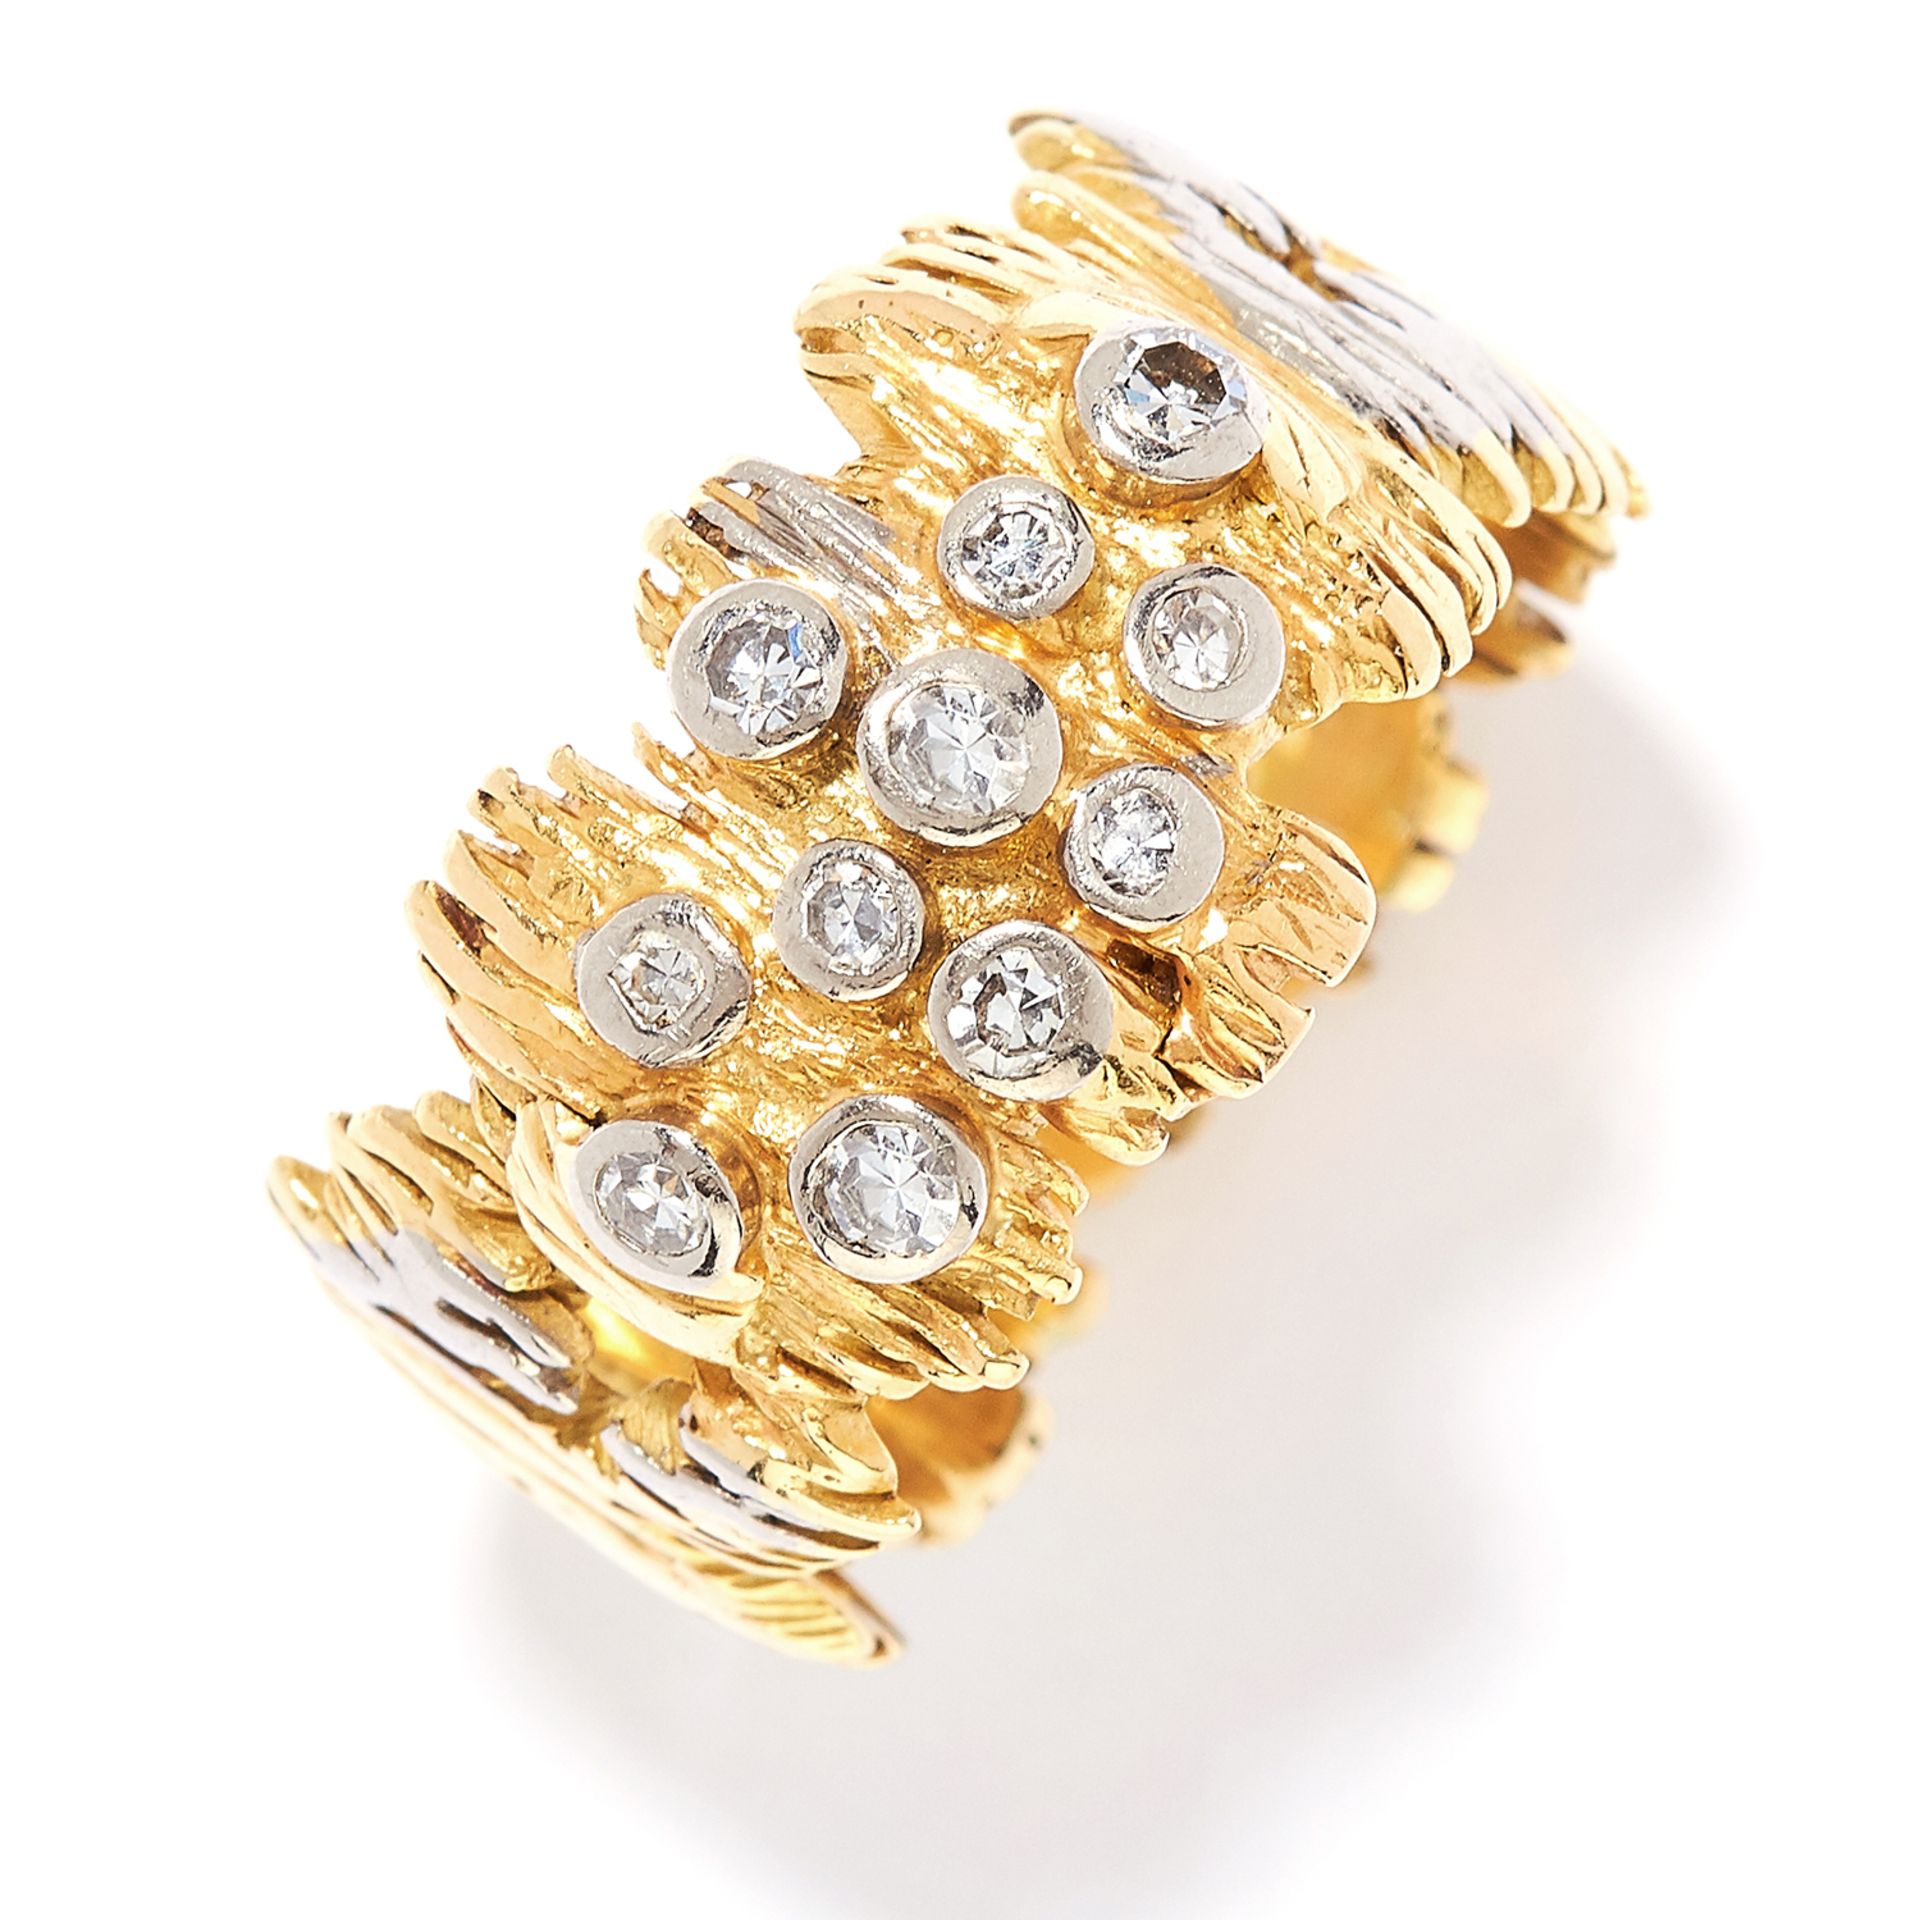 DIAMOND RING, CHARLES DE TEMPLE, 1966 in 18ct yellow and white gold, in textured pierce design set